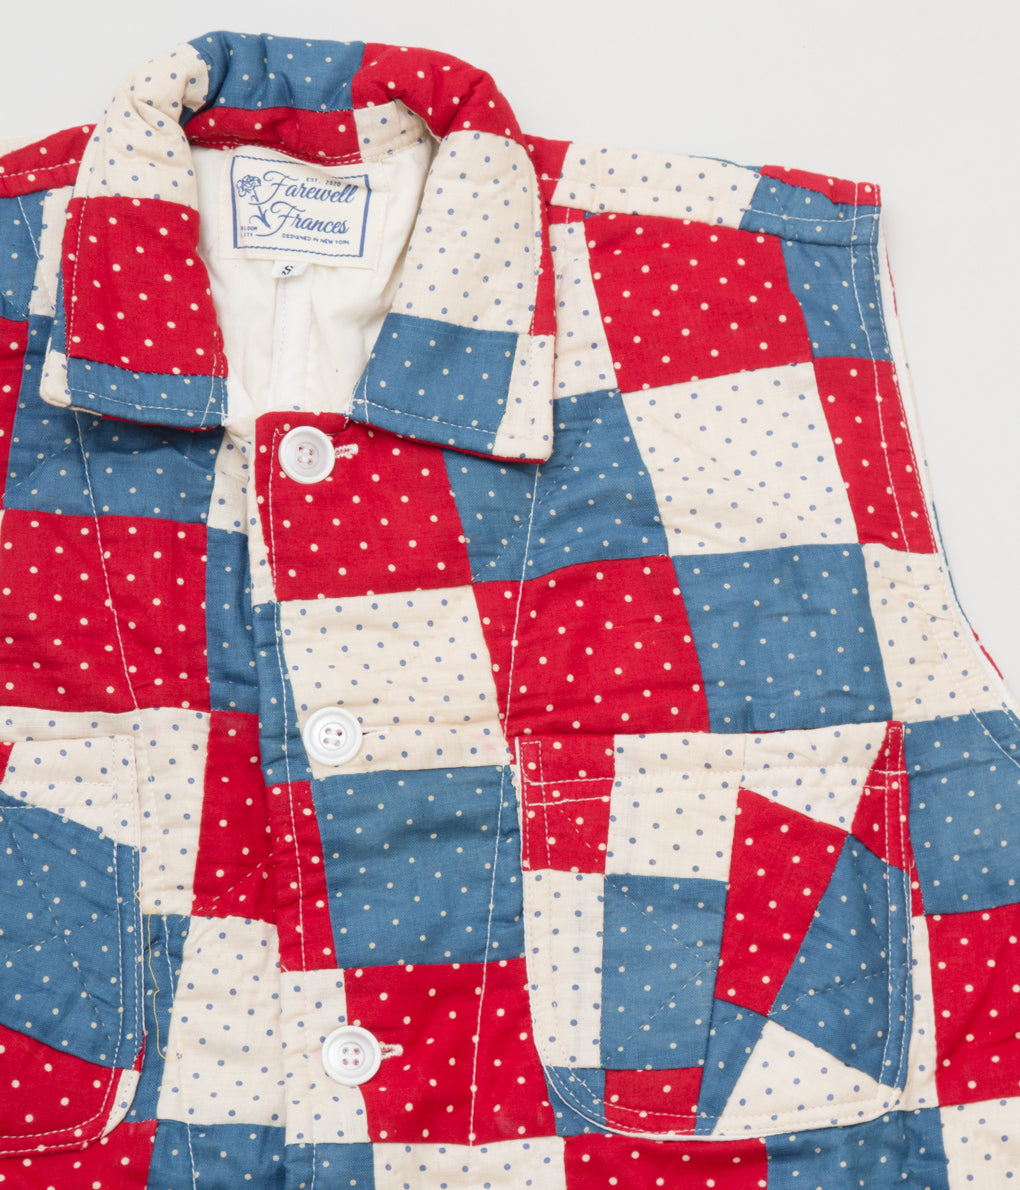 FAREWELL FRANCES "CLAUDE QUILTED VEST"(RED/BLUE MULTI)